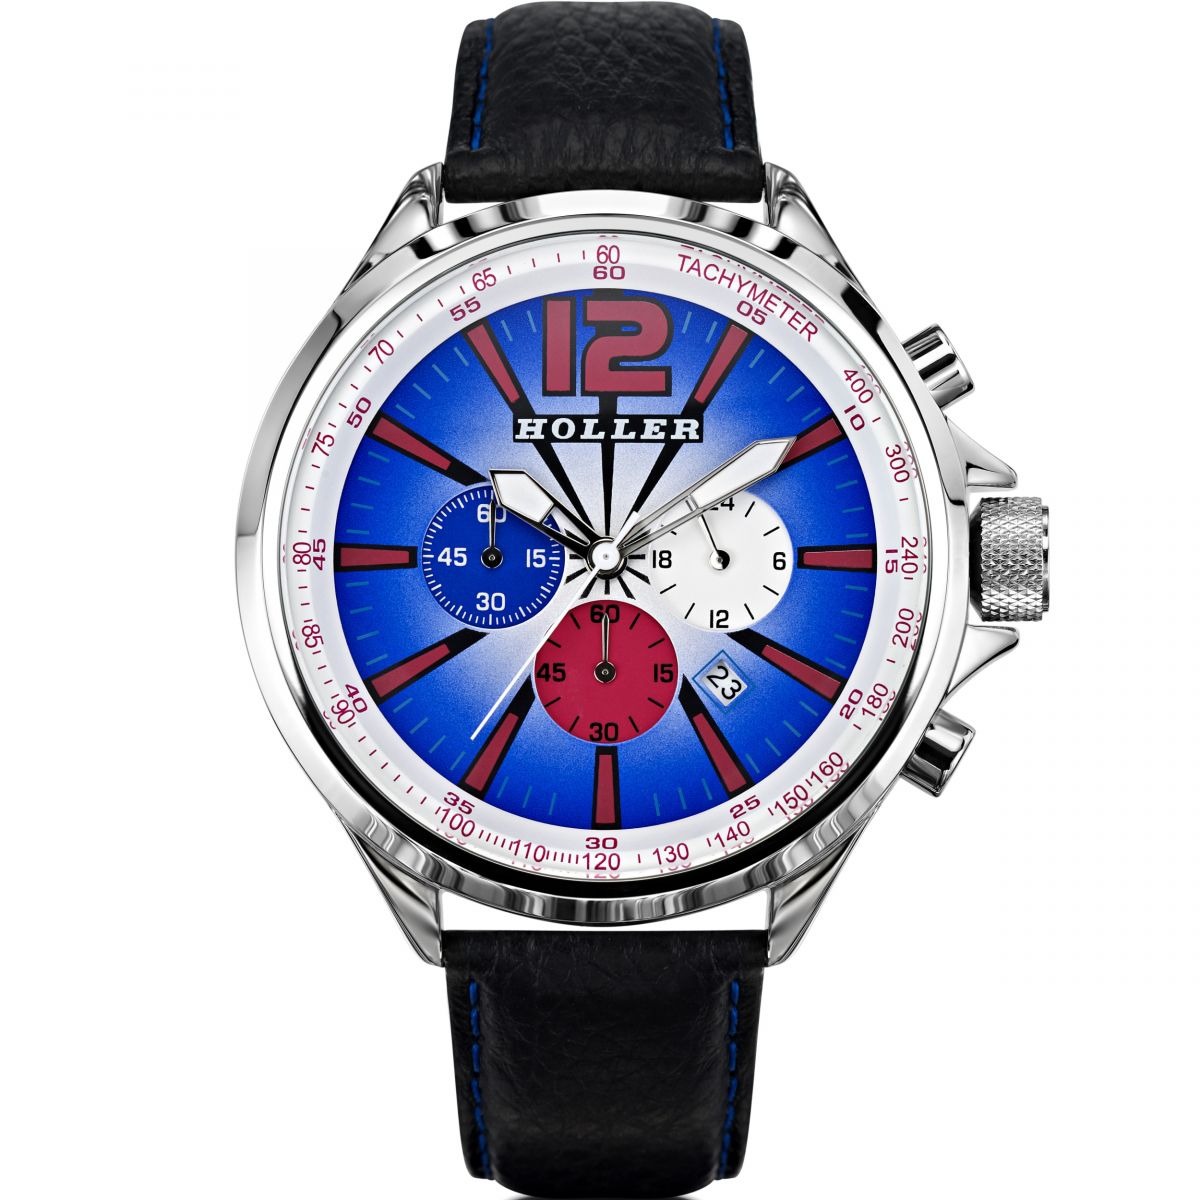 Holler - Mens Chronograph Watch in Blue from Watch Shop GOOFASH